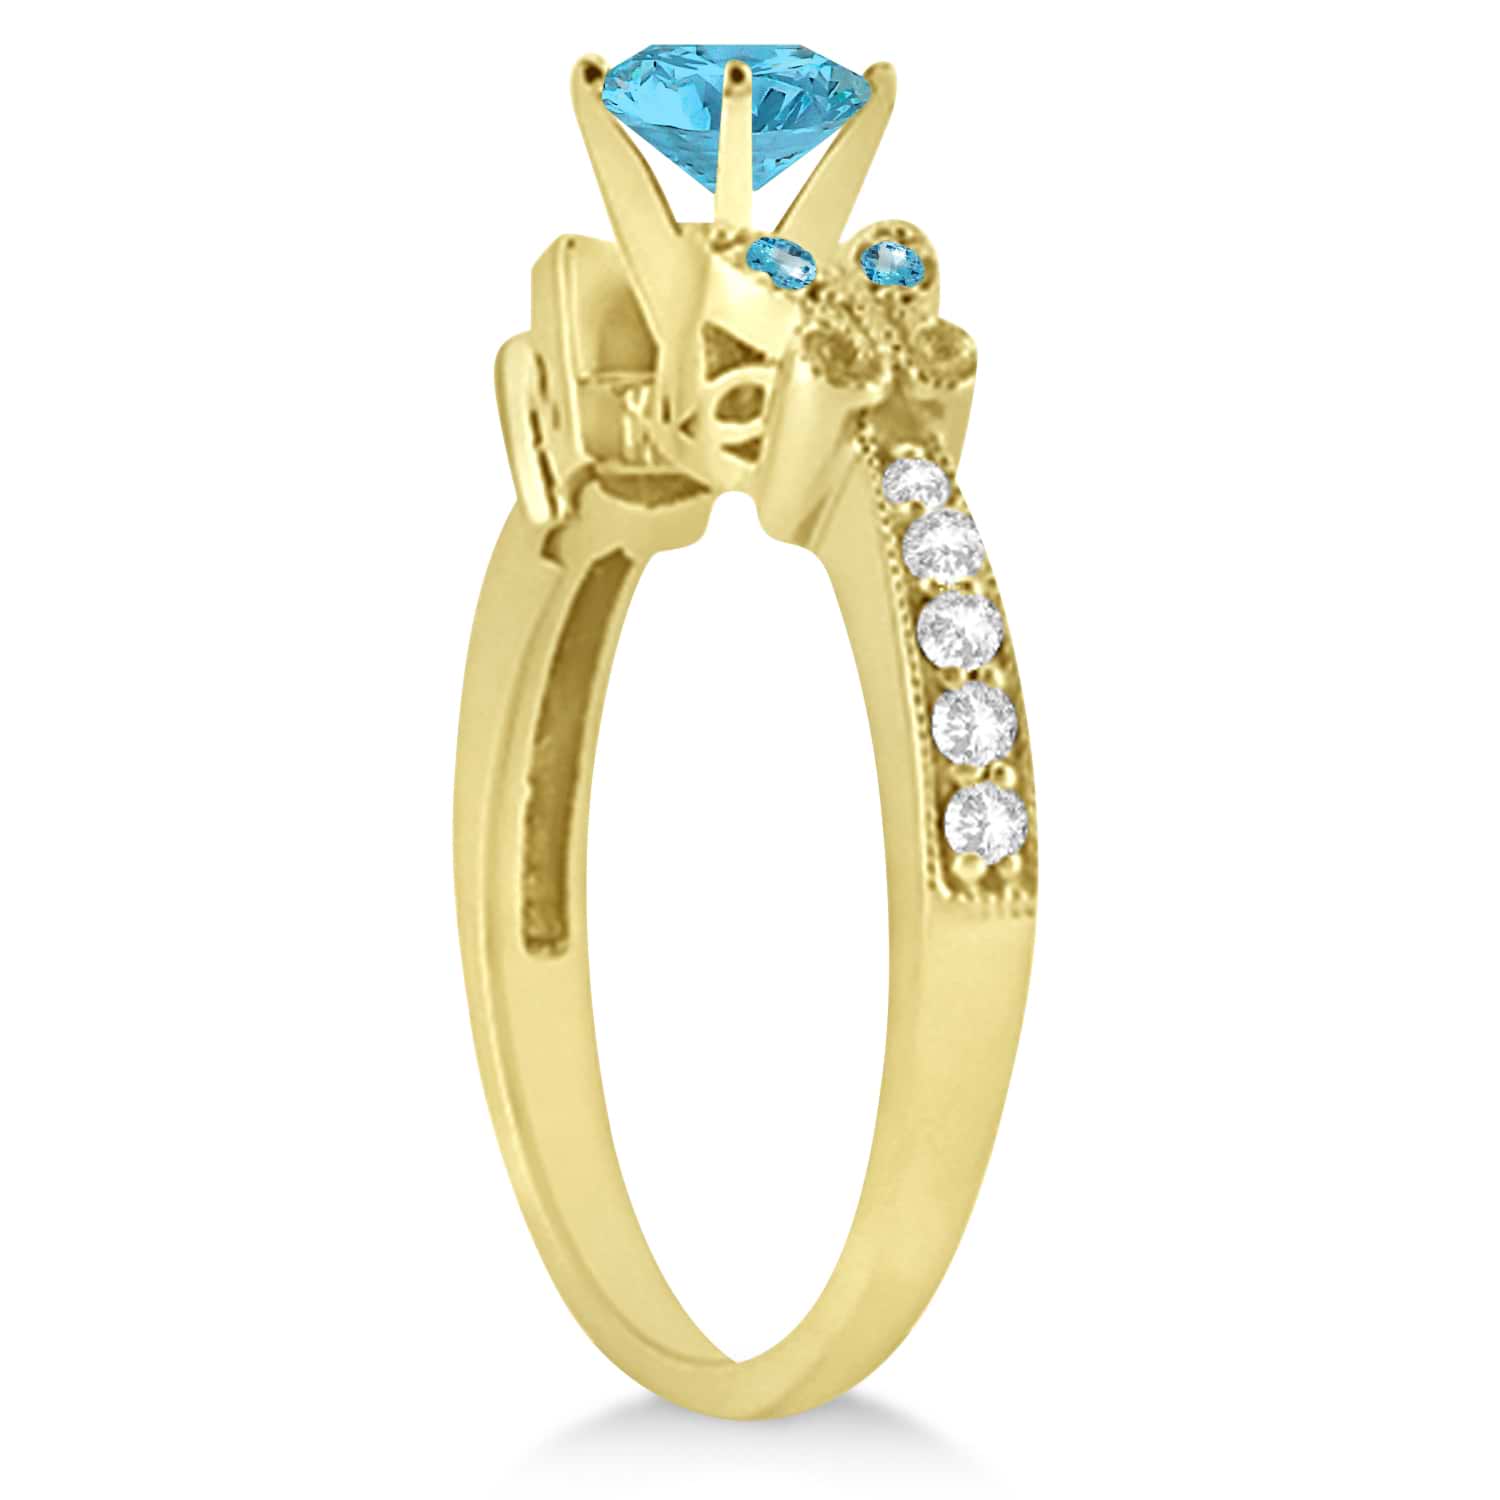 Butterfly Blue Topaz & Diamond Engagement Ring 18K Yellow Gold 1.28ct